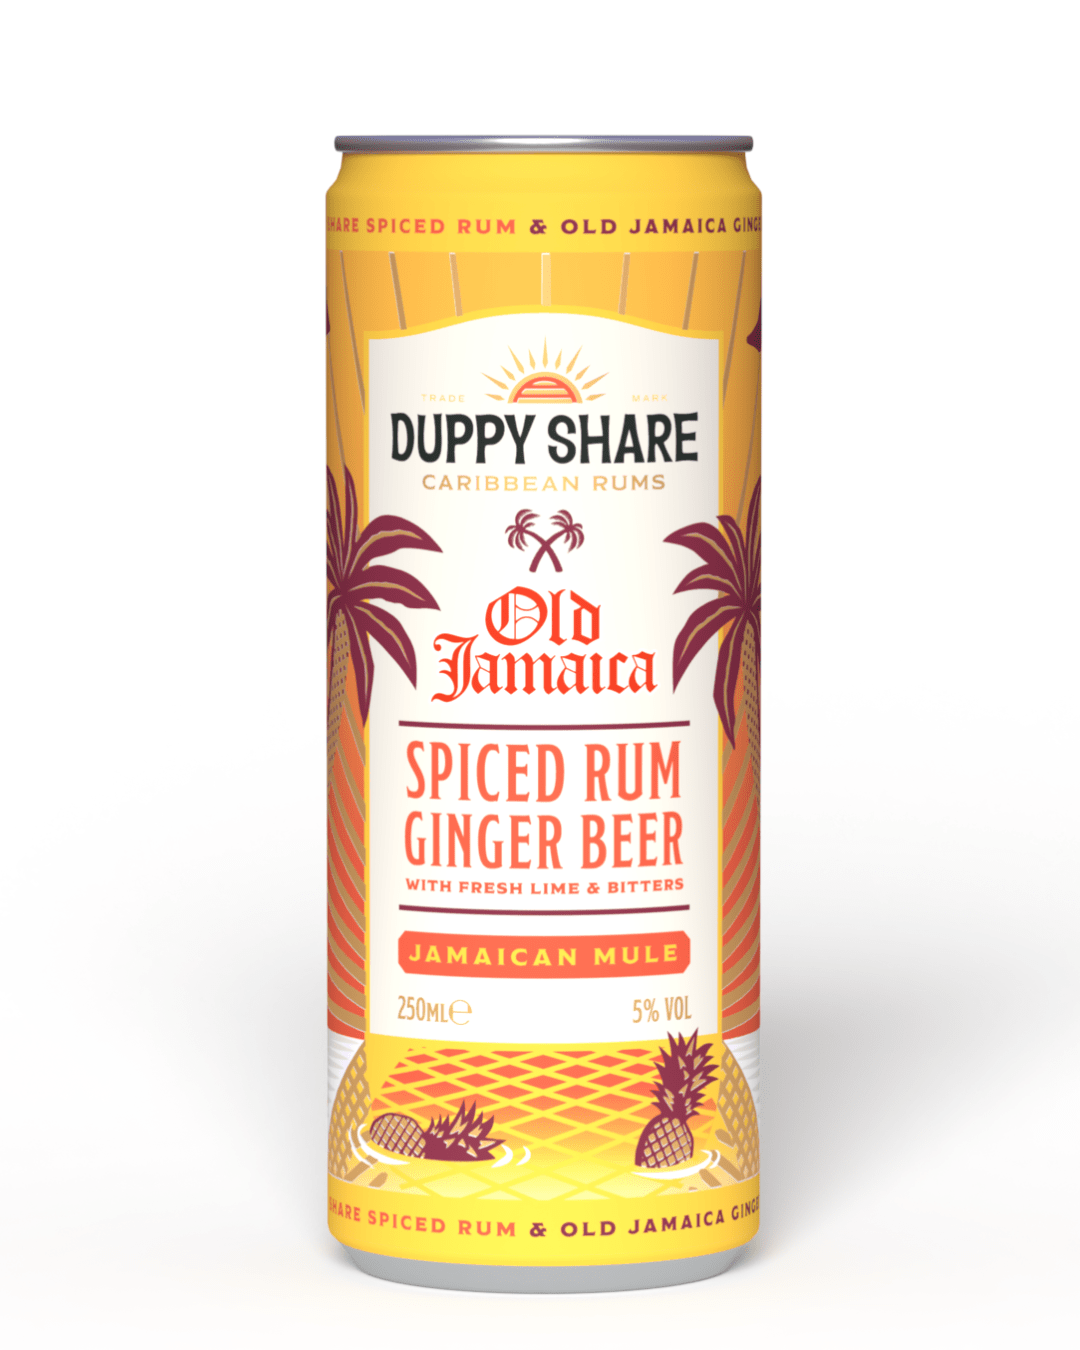 Duppy Share Old Jamaica Spiced Rum Ginger Beer Multipack, 12 x 250 ml spirits